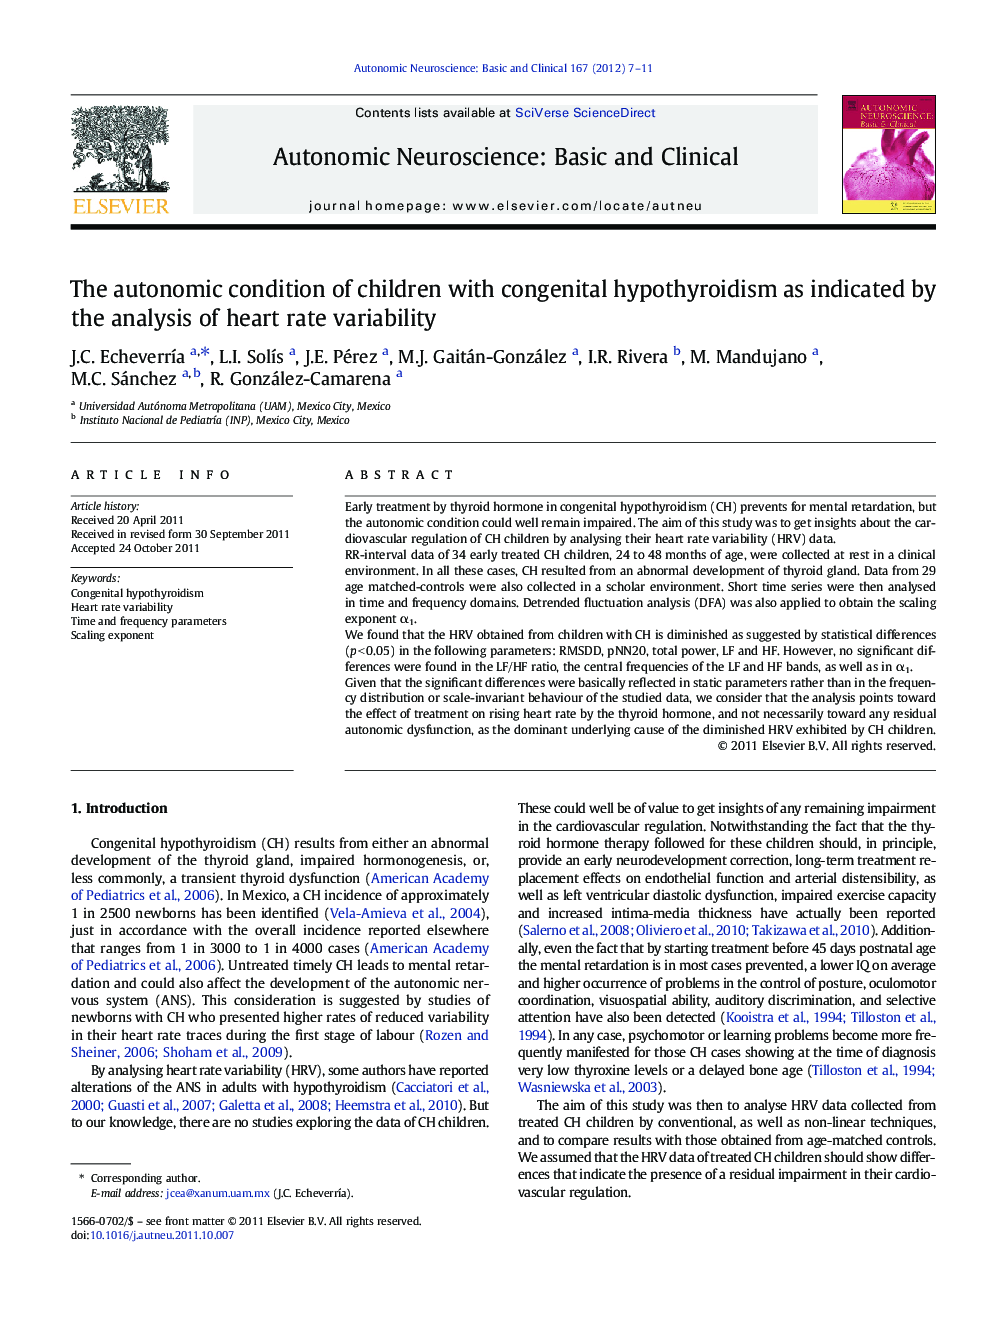 The autonomic condition of children with congenital hypothyroidism as indicated by the analysis of heart rate variability